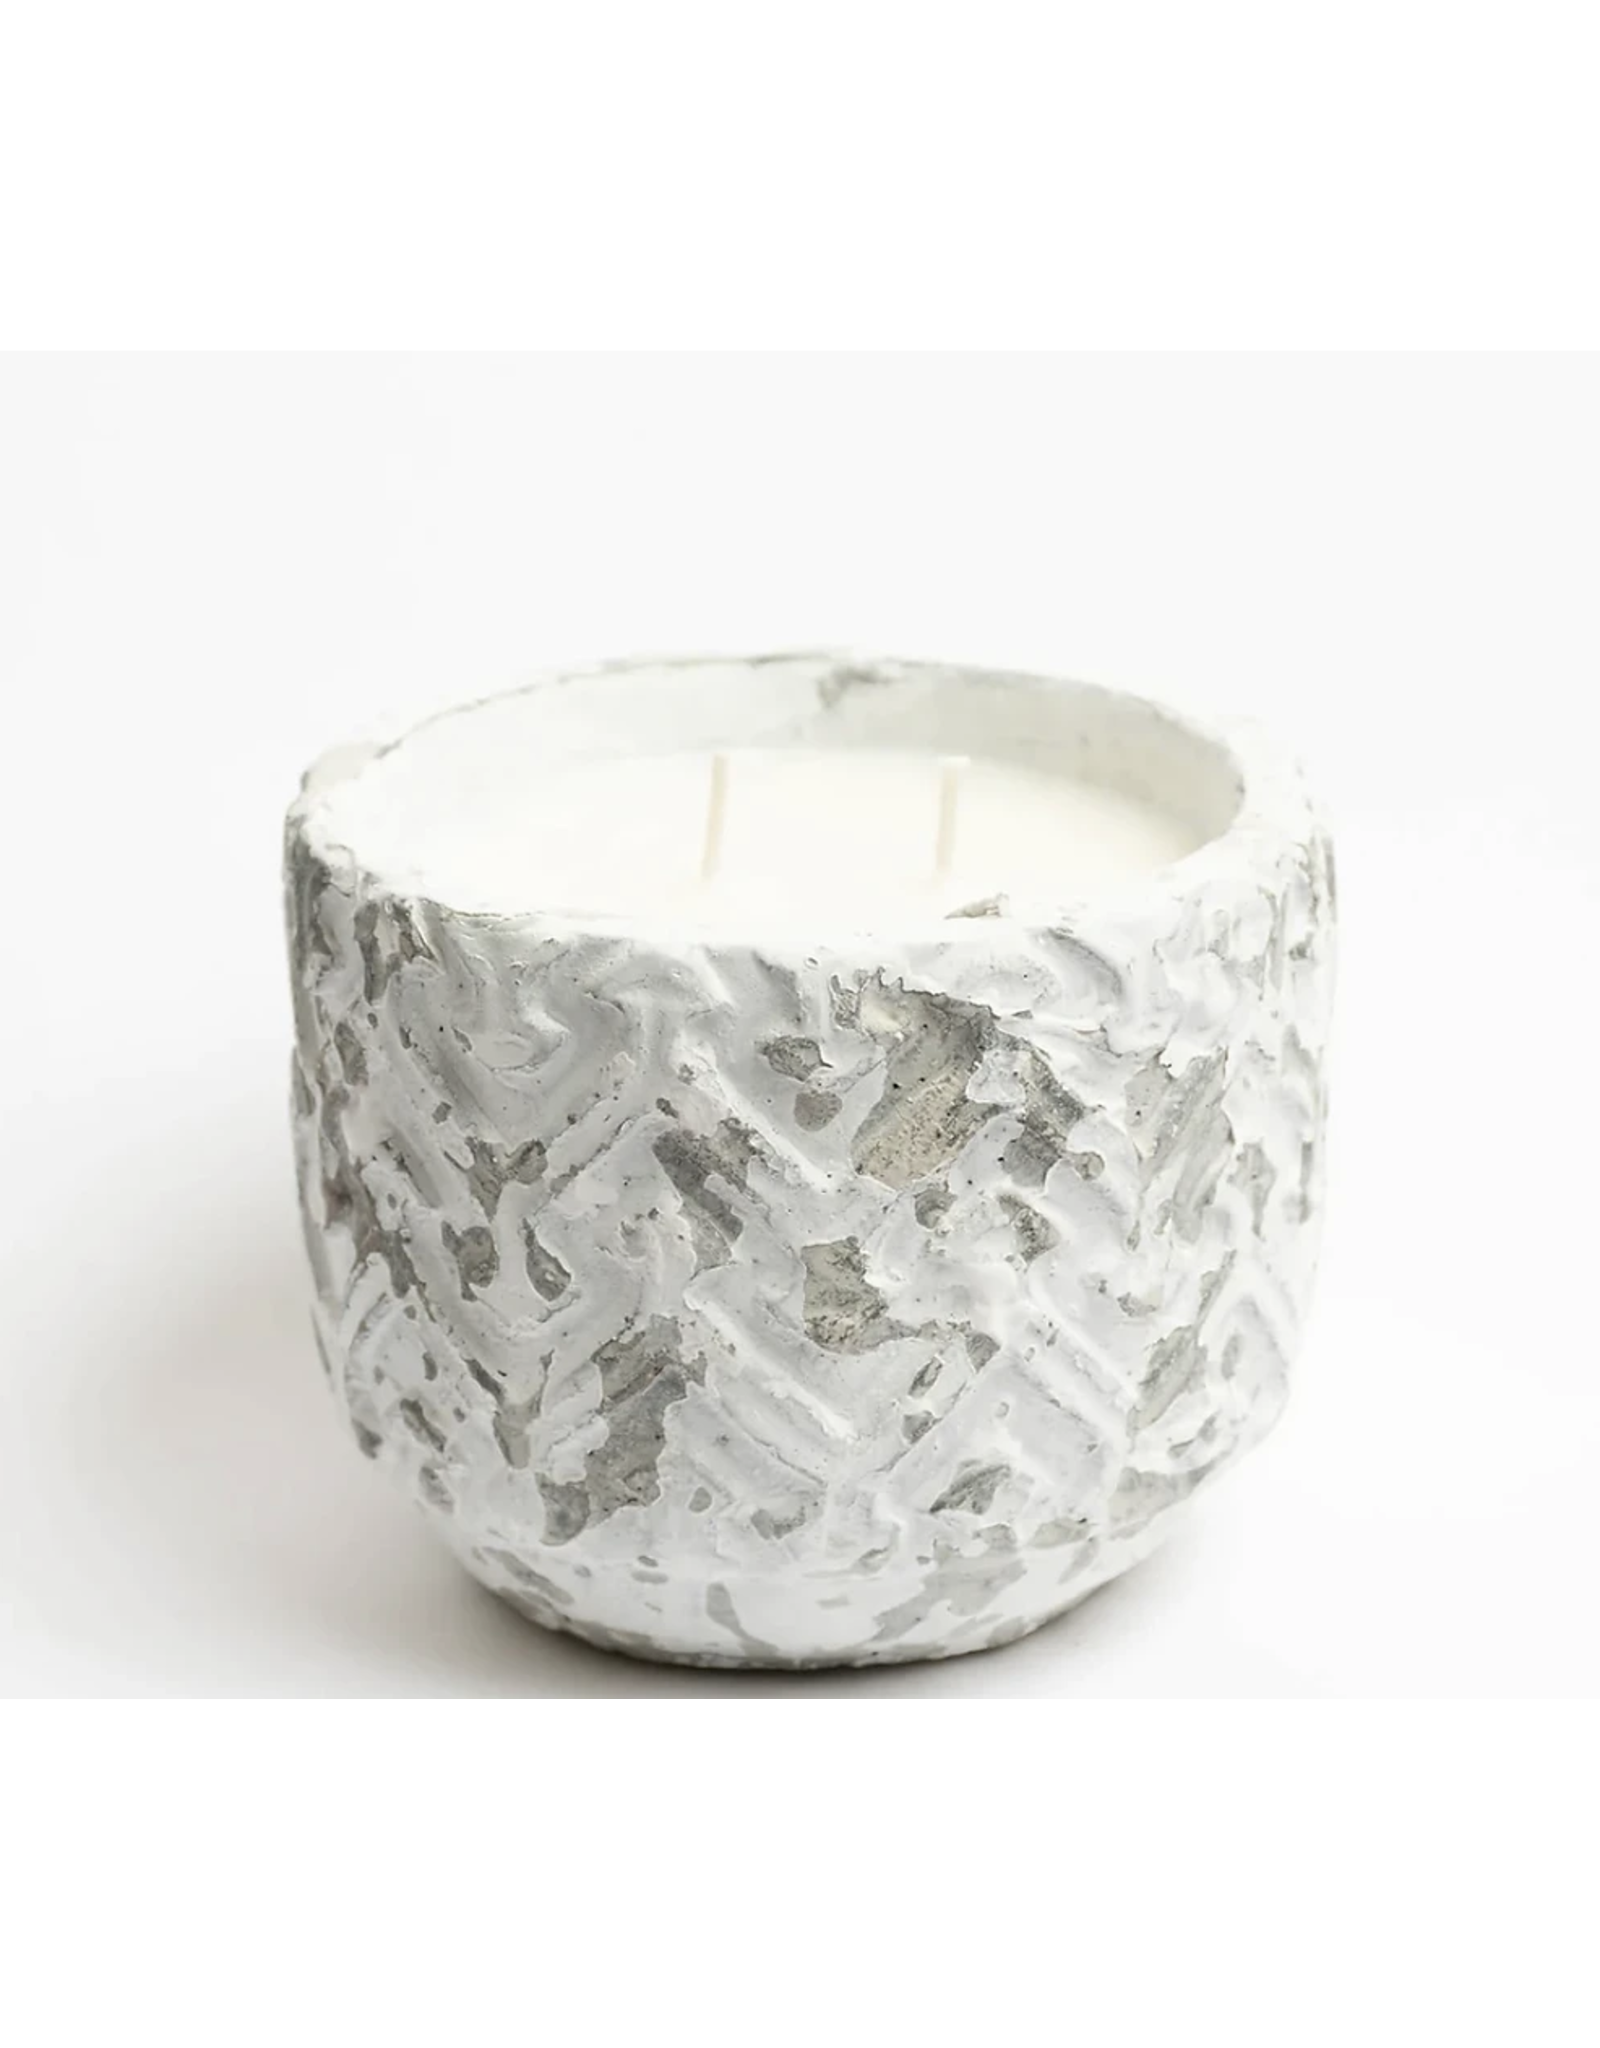 Southern Lights Candle Southern Breeze Rustic Concrete Candle